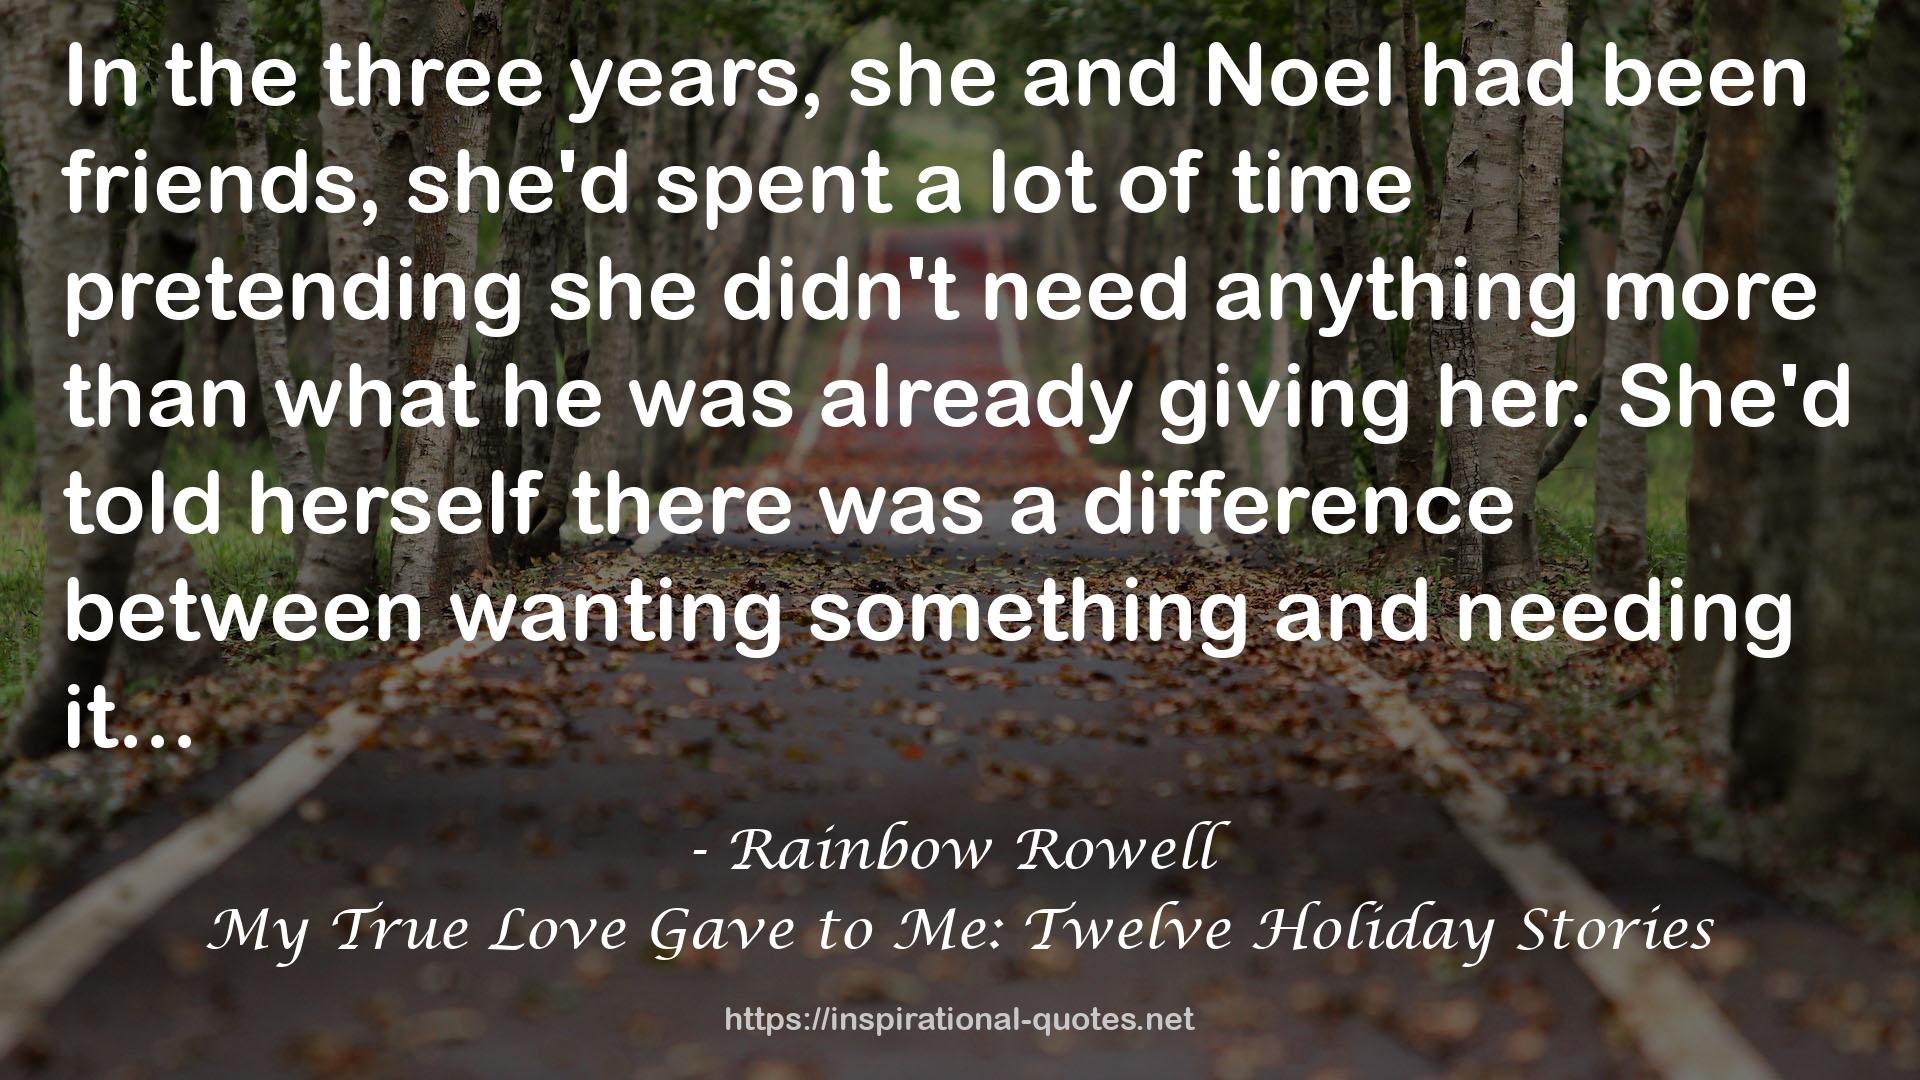 My True Love Gave to Me: Twelve Holiday Stories QUOTES